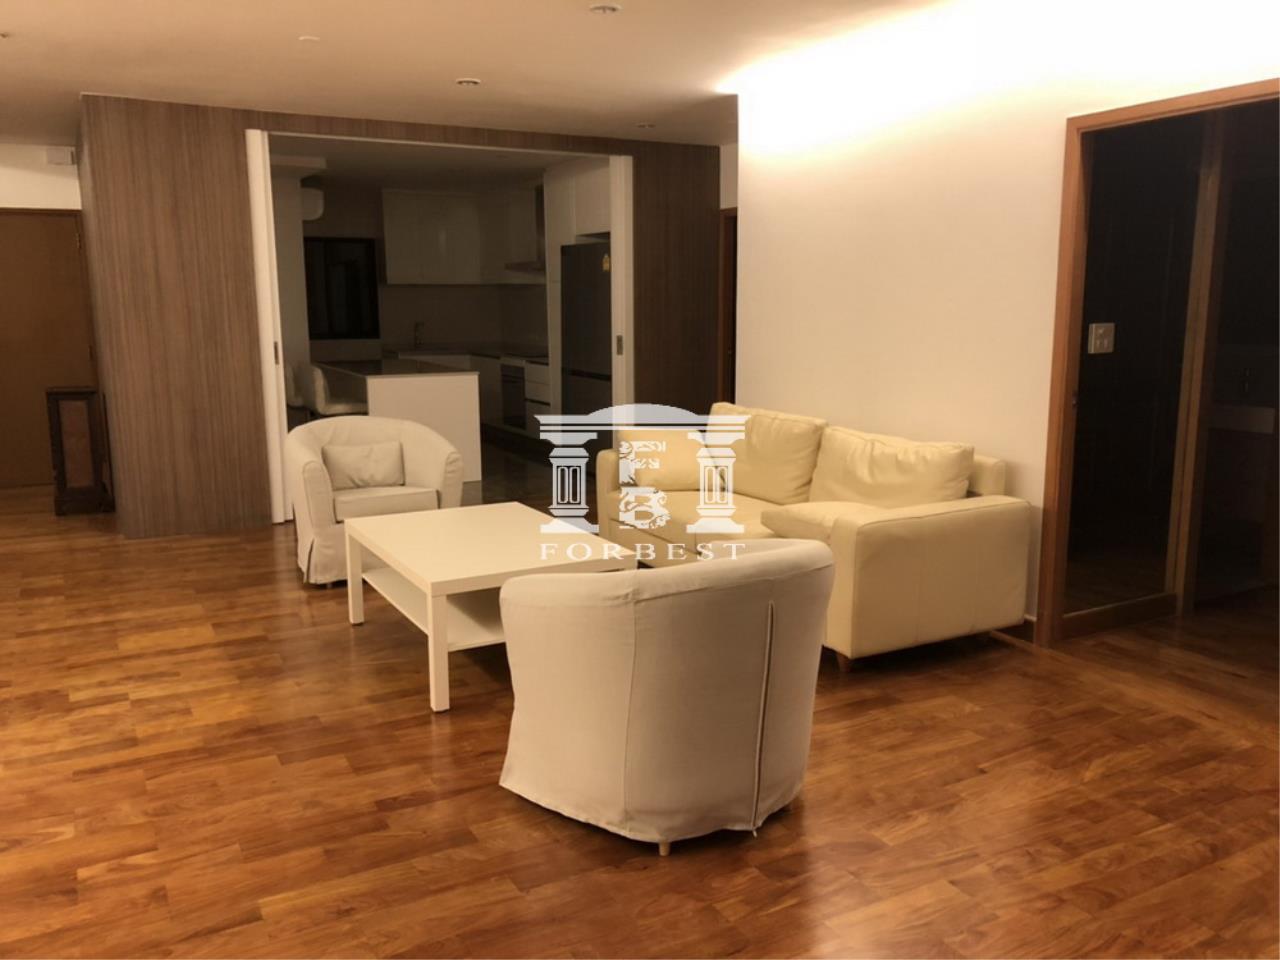 Forbest Properties Agency's 42034 - Sathorn Gardens, Condo for rent,  area 200 sq.m., 36th floor. 2